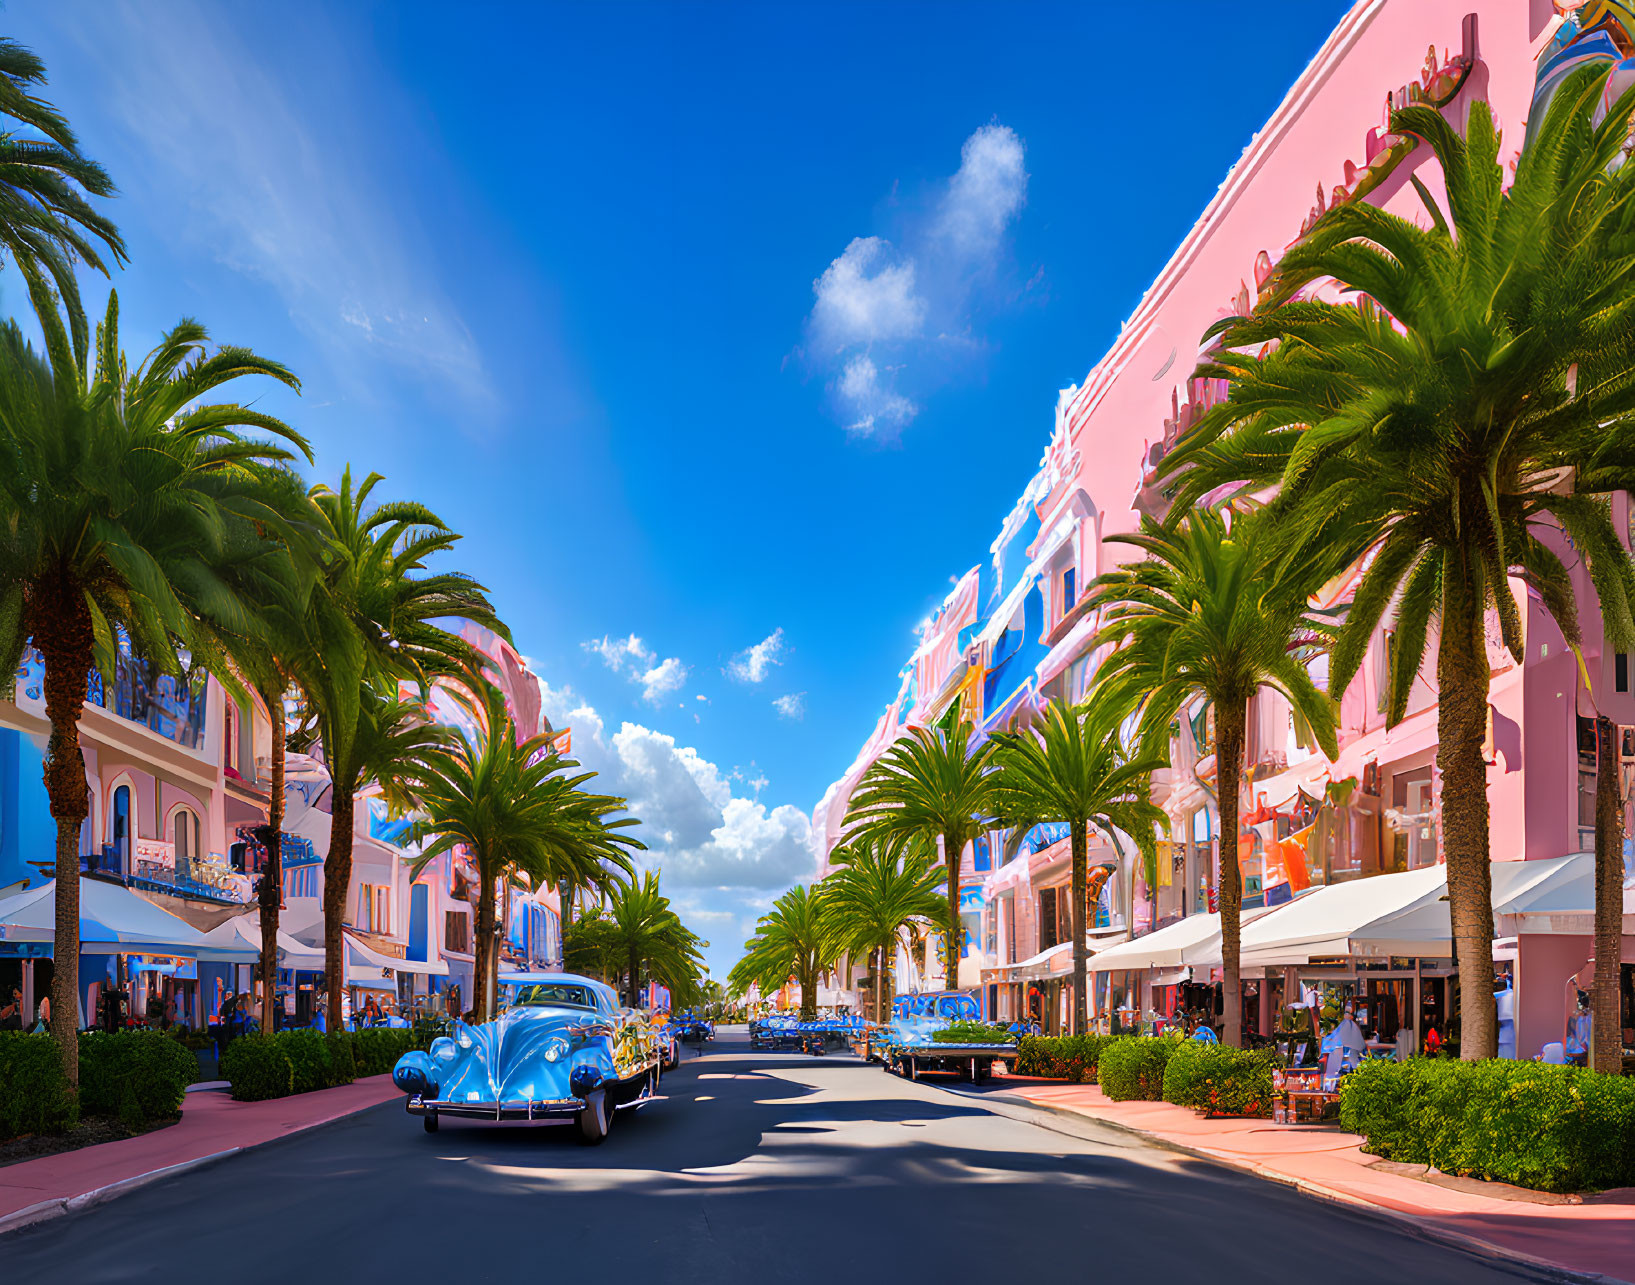 Colorful Street Scene with Palm Trees, Buildings, and Blue Car